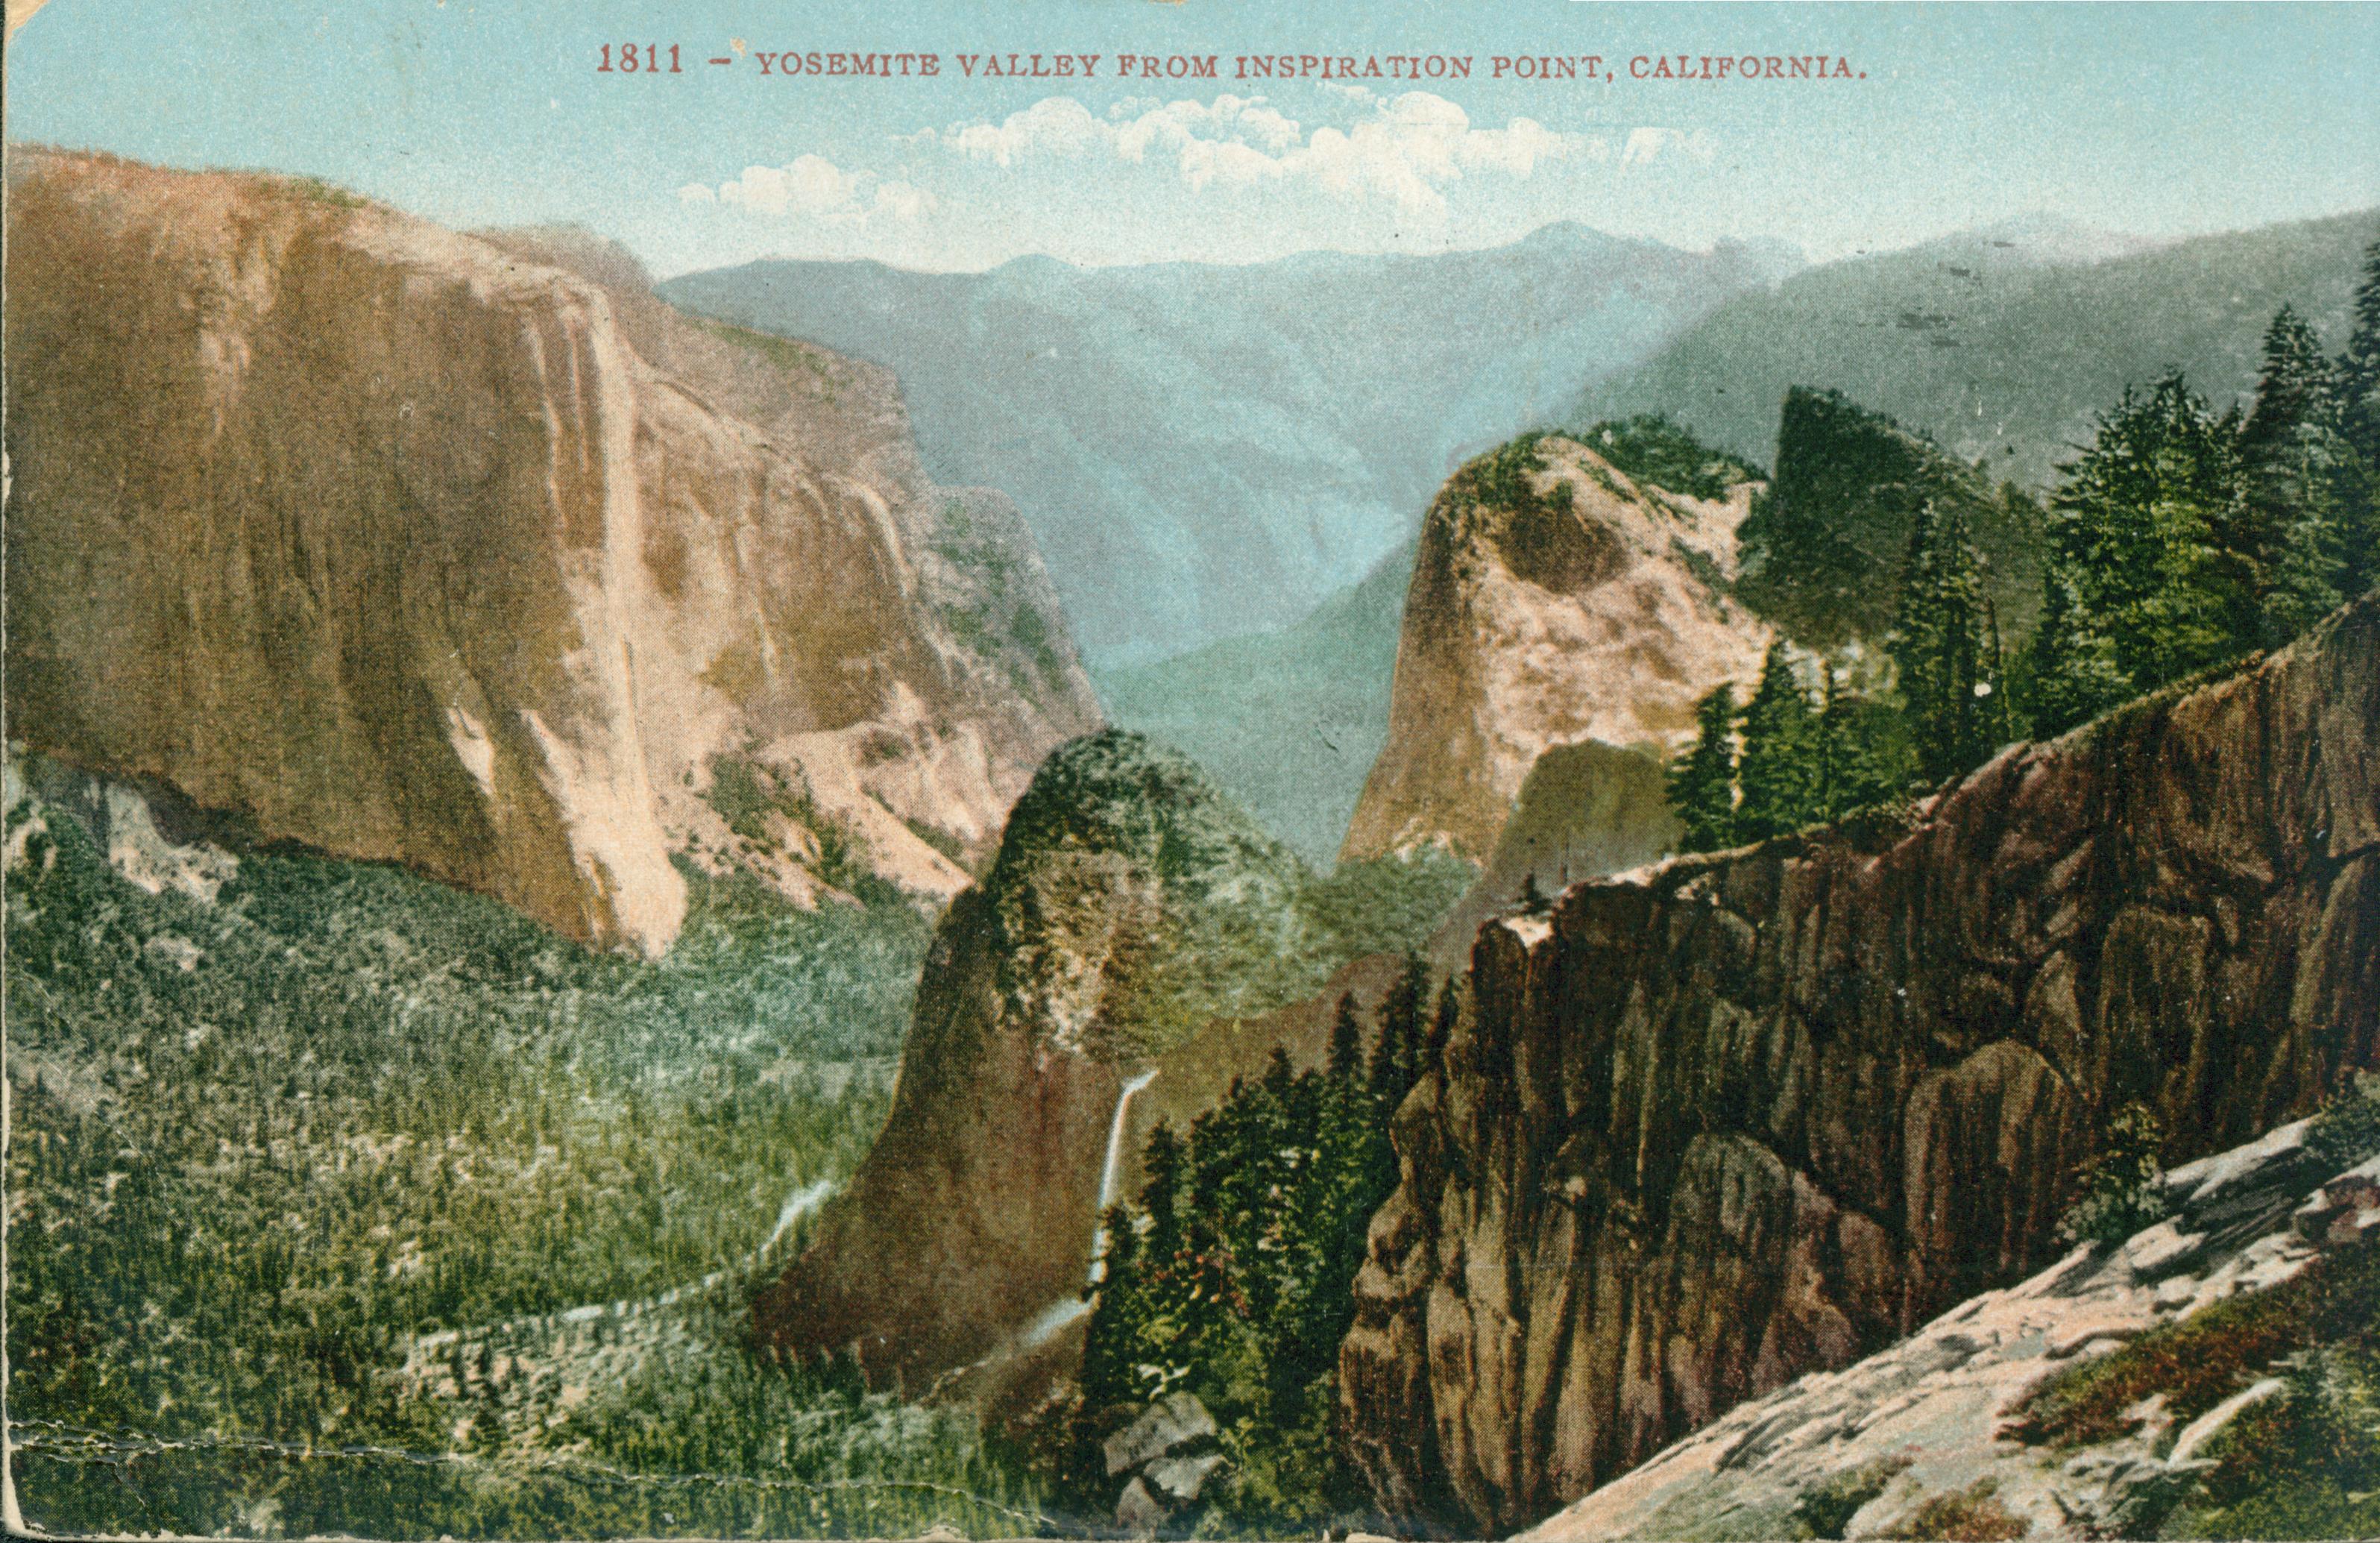 Shows a view of the Yosemite Valley, with a several rock formations and a waterfall